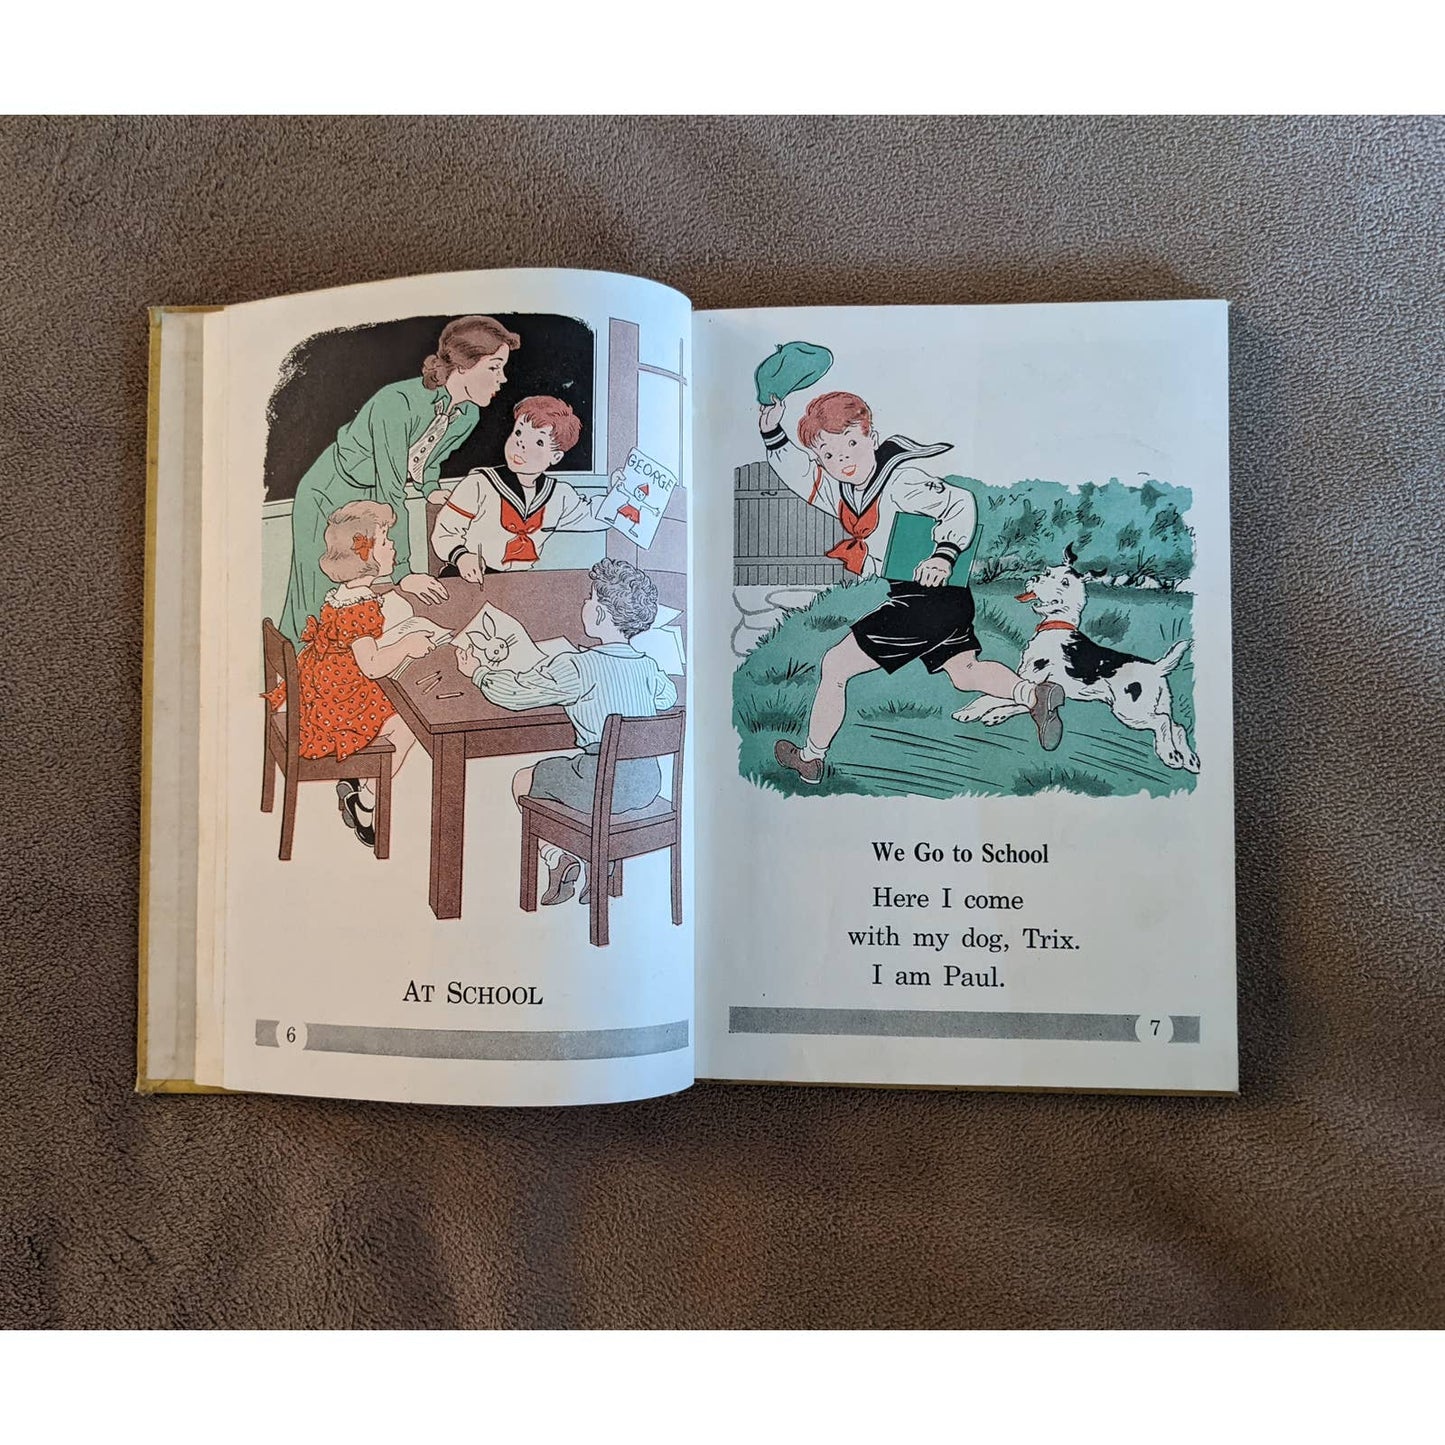 Vintage 1938 The Road To Safety Happy Times Book Illustrations Childrens Bedtime